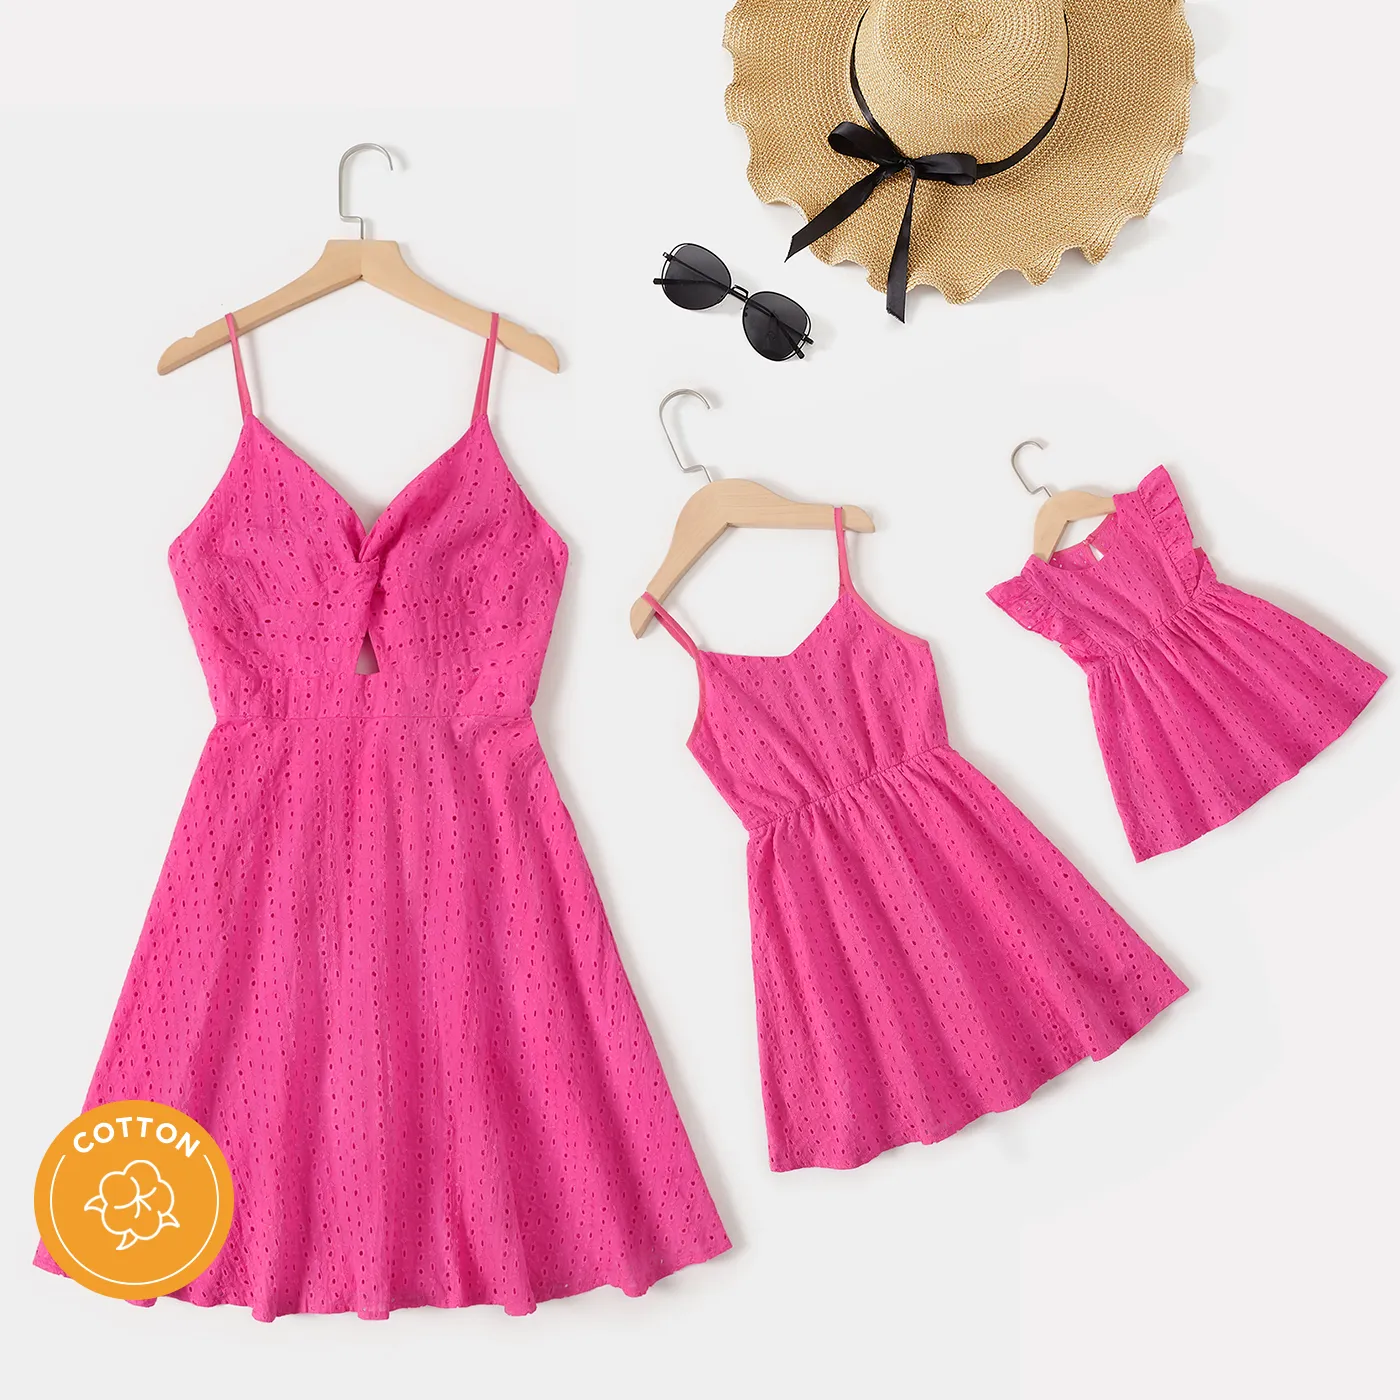 100% Cotton Hot Pink Eyelet Embroidered Cami Dress for Mom and Me